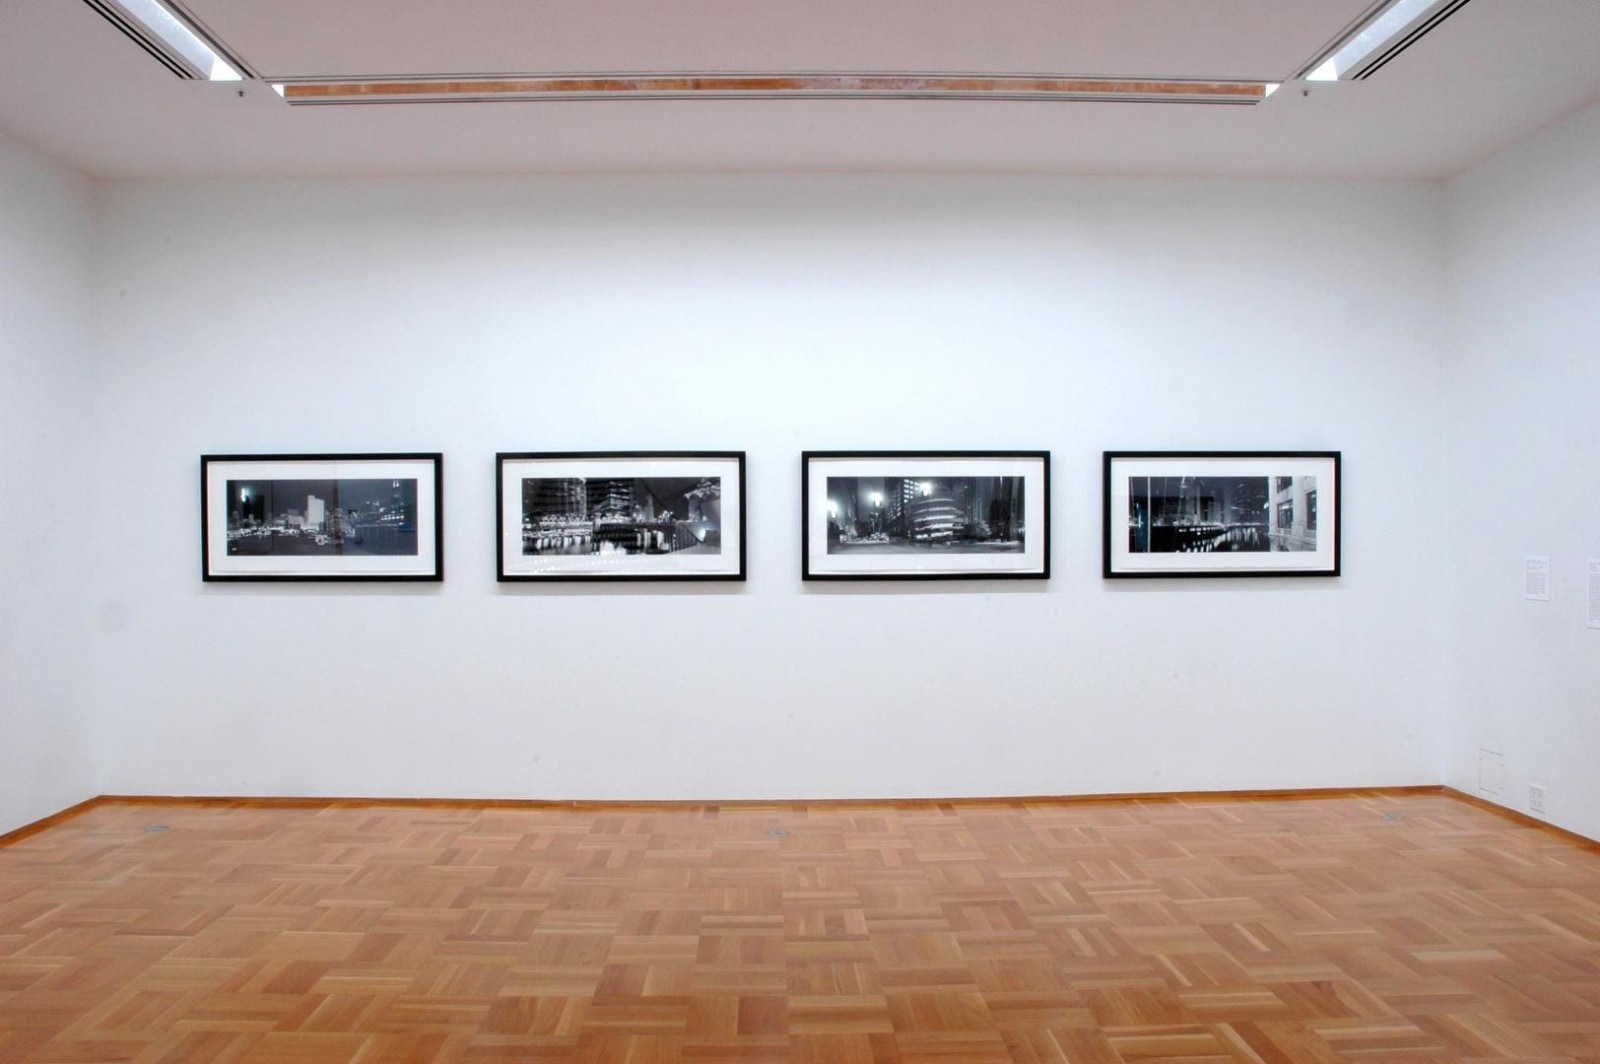  Installation view of Catherine Opie: Chicago (American Cities) at the Museum of Contemporary Art, Chicago